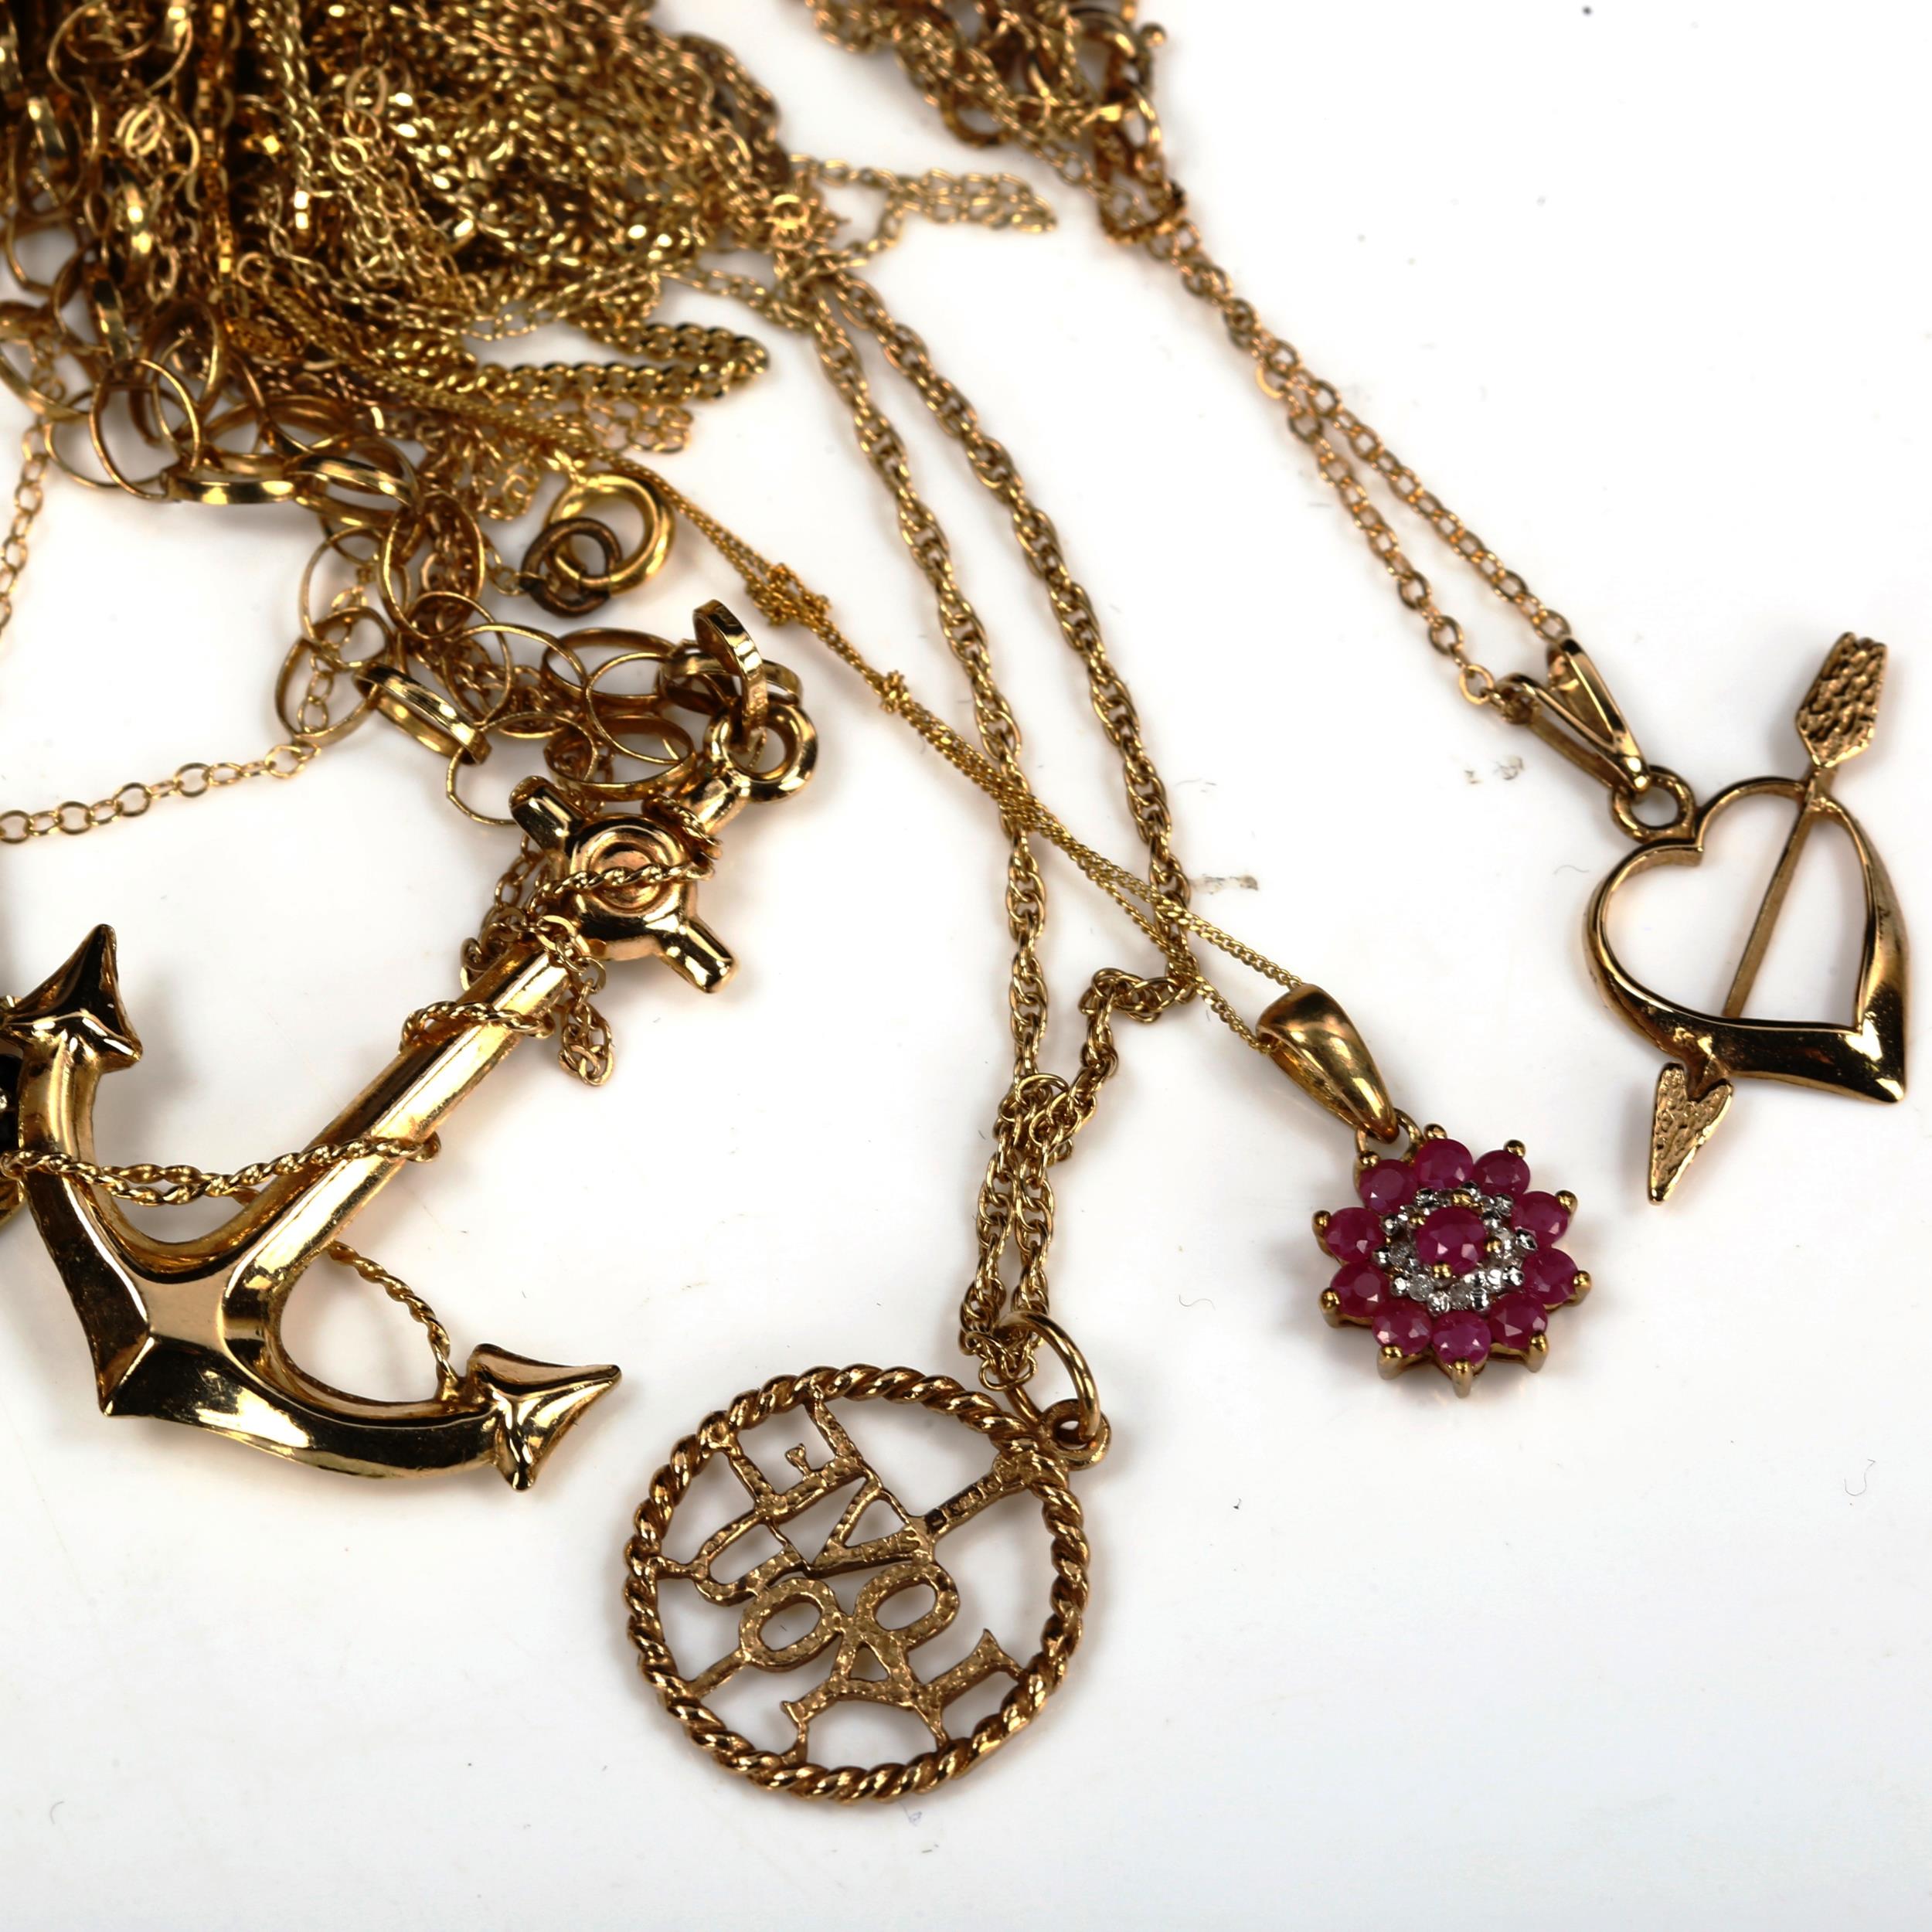 Various 9ct gold jewellery, including anchor pendant, photo locket etc, 23.9g Lot sold as seen - Image 2 of 4